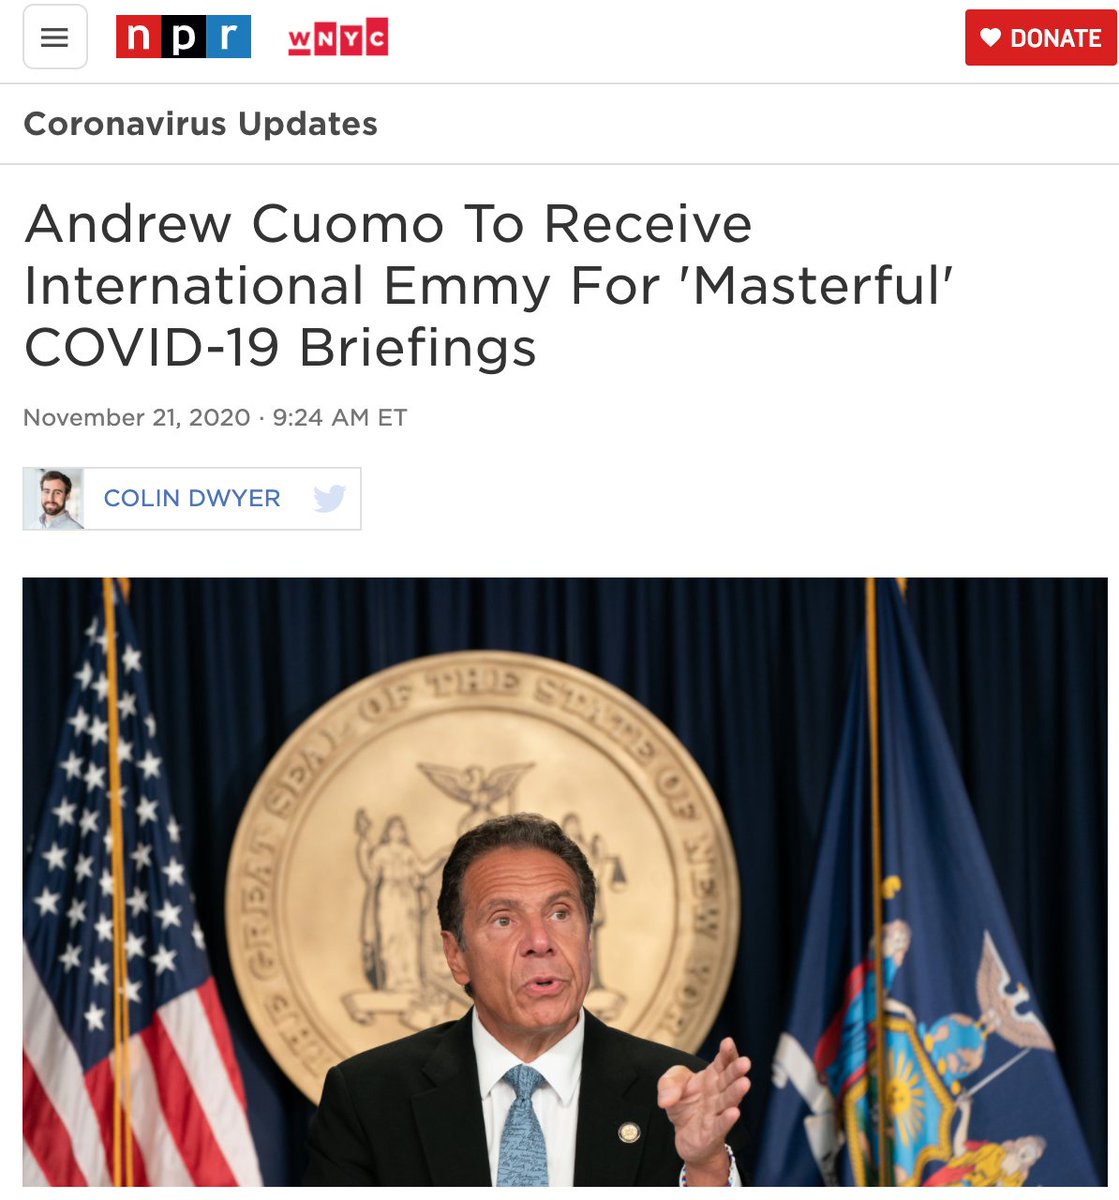 Cuomo is the everything for 2020's failures of institutional trust: Government, media, entertainment all rolled together-Cuomo said covid was no big deal-He did horribly with covid-His brother, a popular anchor, helped his image-THEY GAVE HIM AN EMMY!